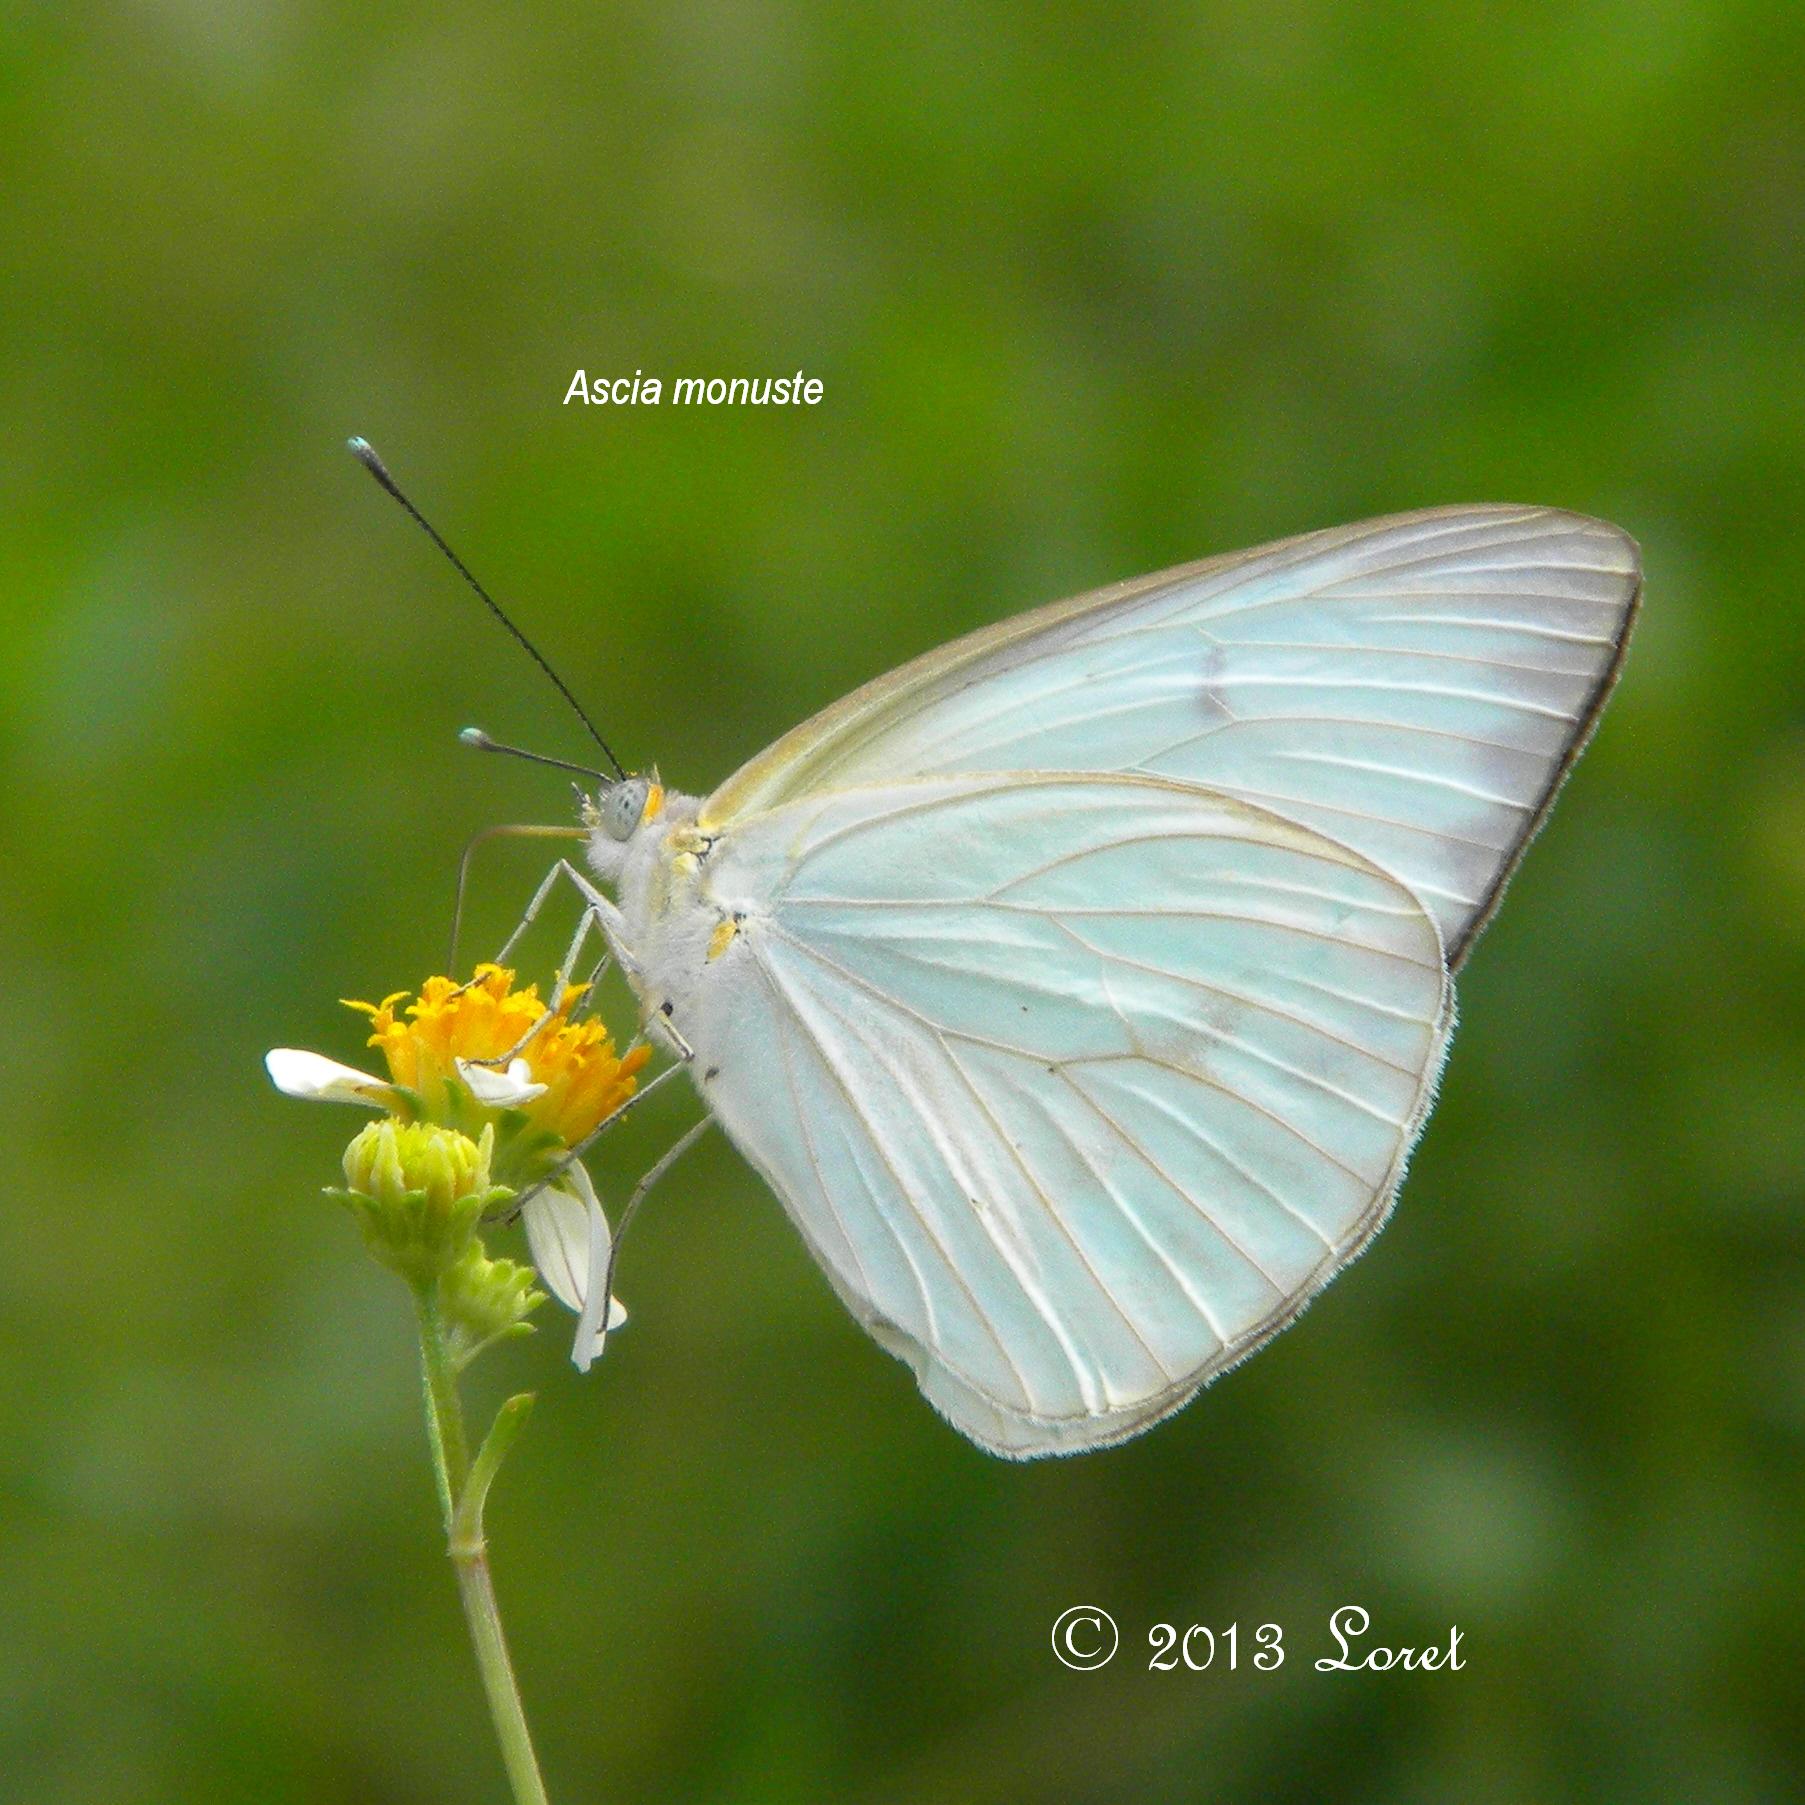 Great Southern White Butterfly (Ascia monuste) | Central Florida ...